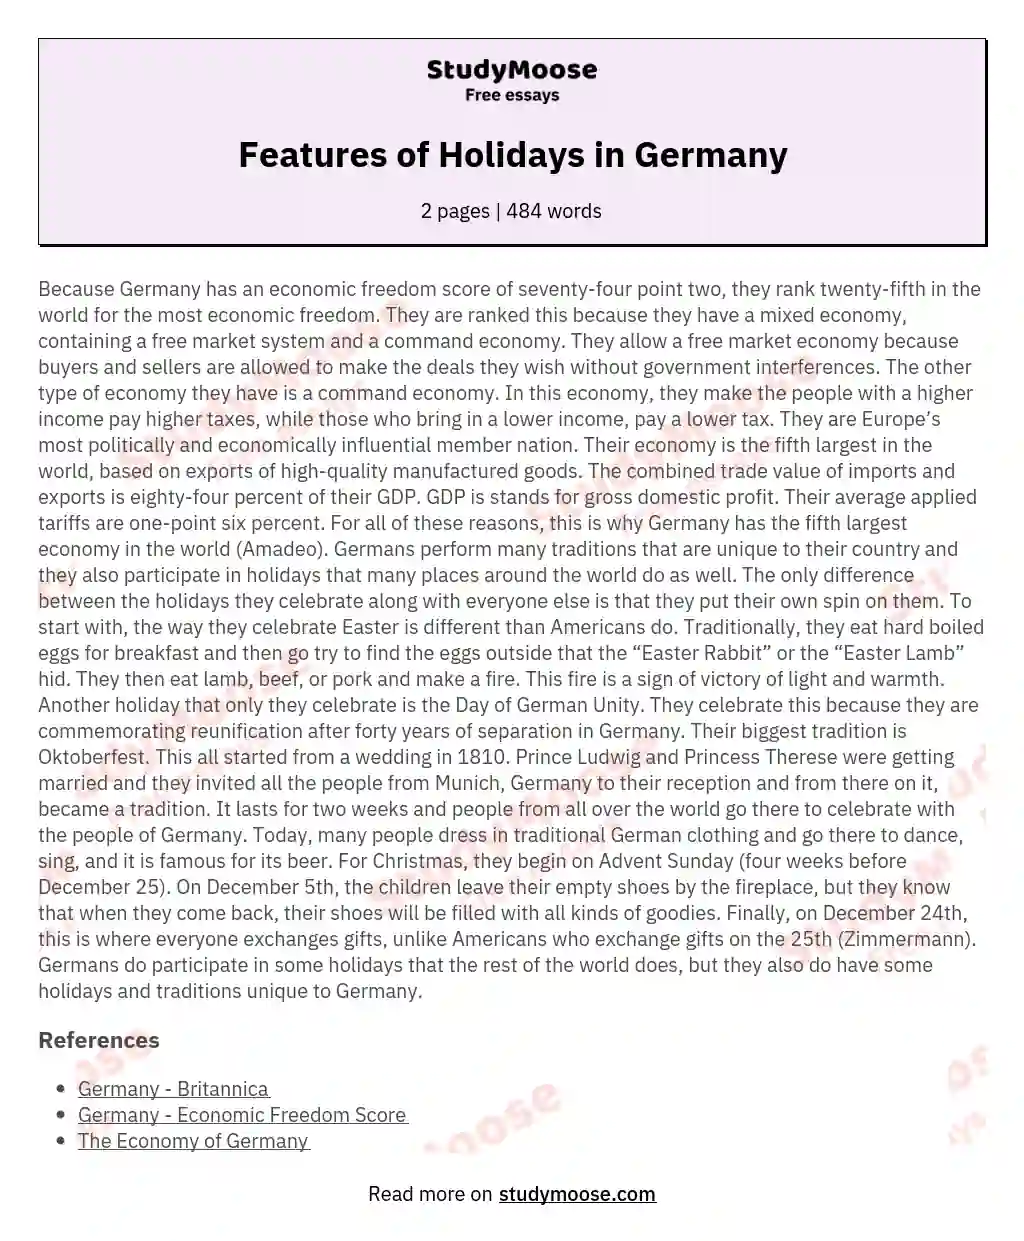 Features of Holidays in Germany essay